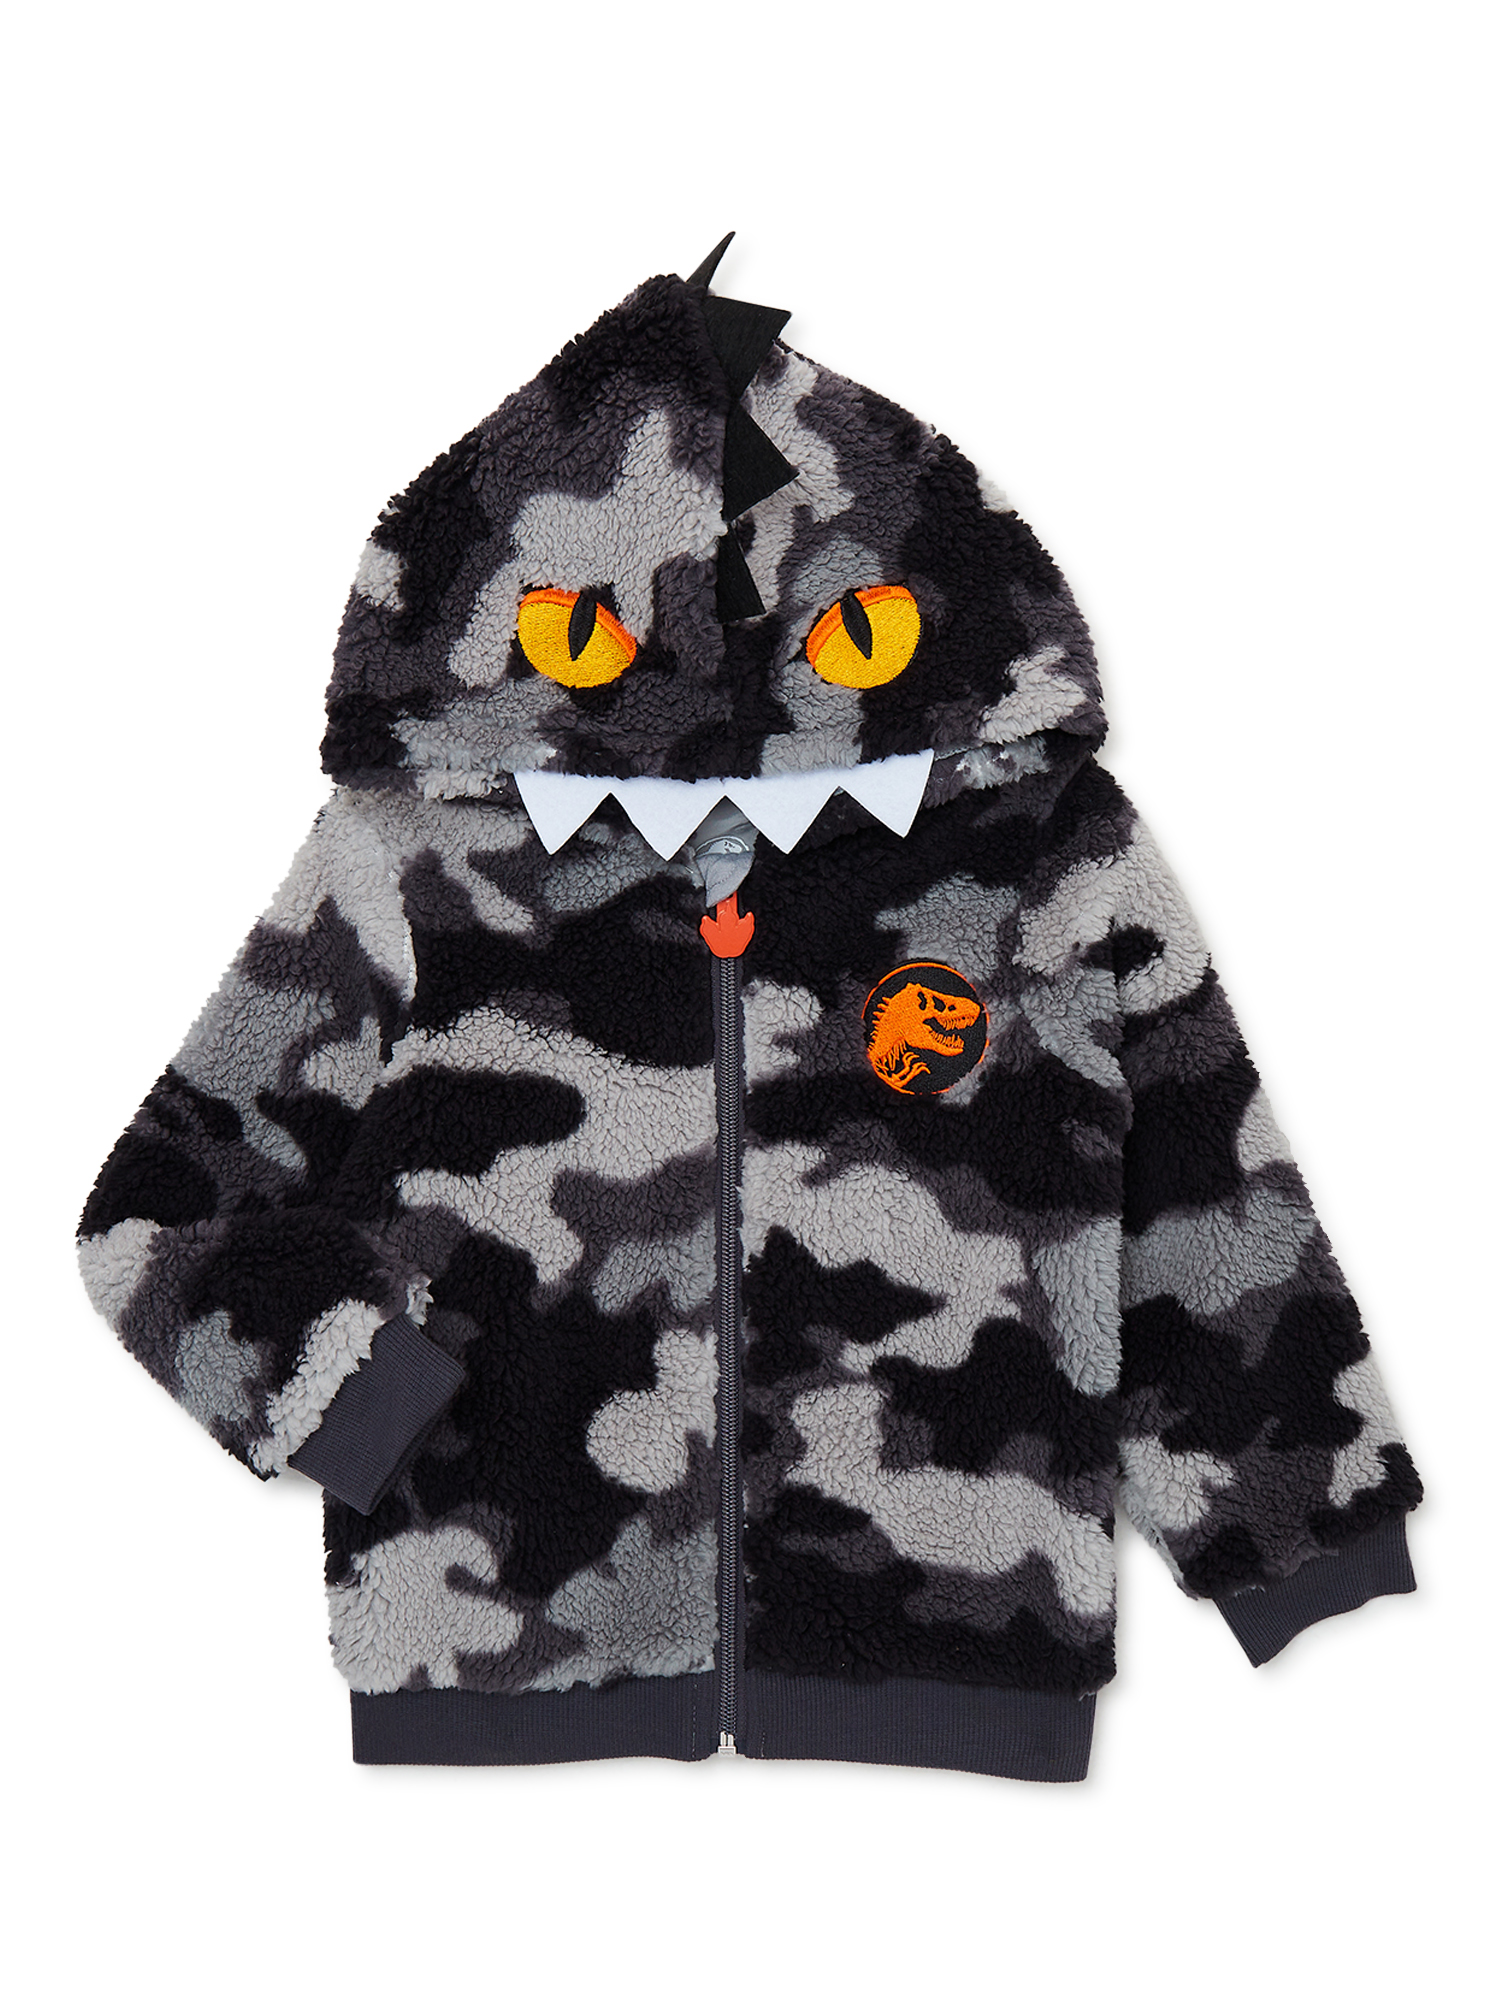 Jurassic World Toddler Cosplay Faux Sherpa Hoodie, 12M-5T - image 1 of 10